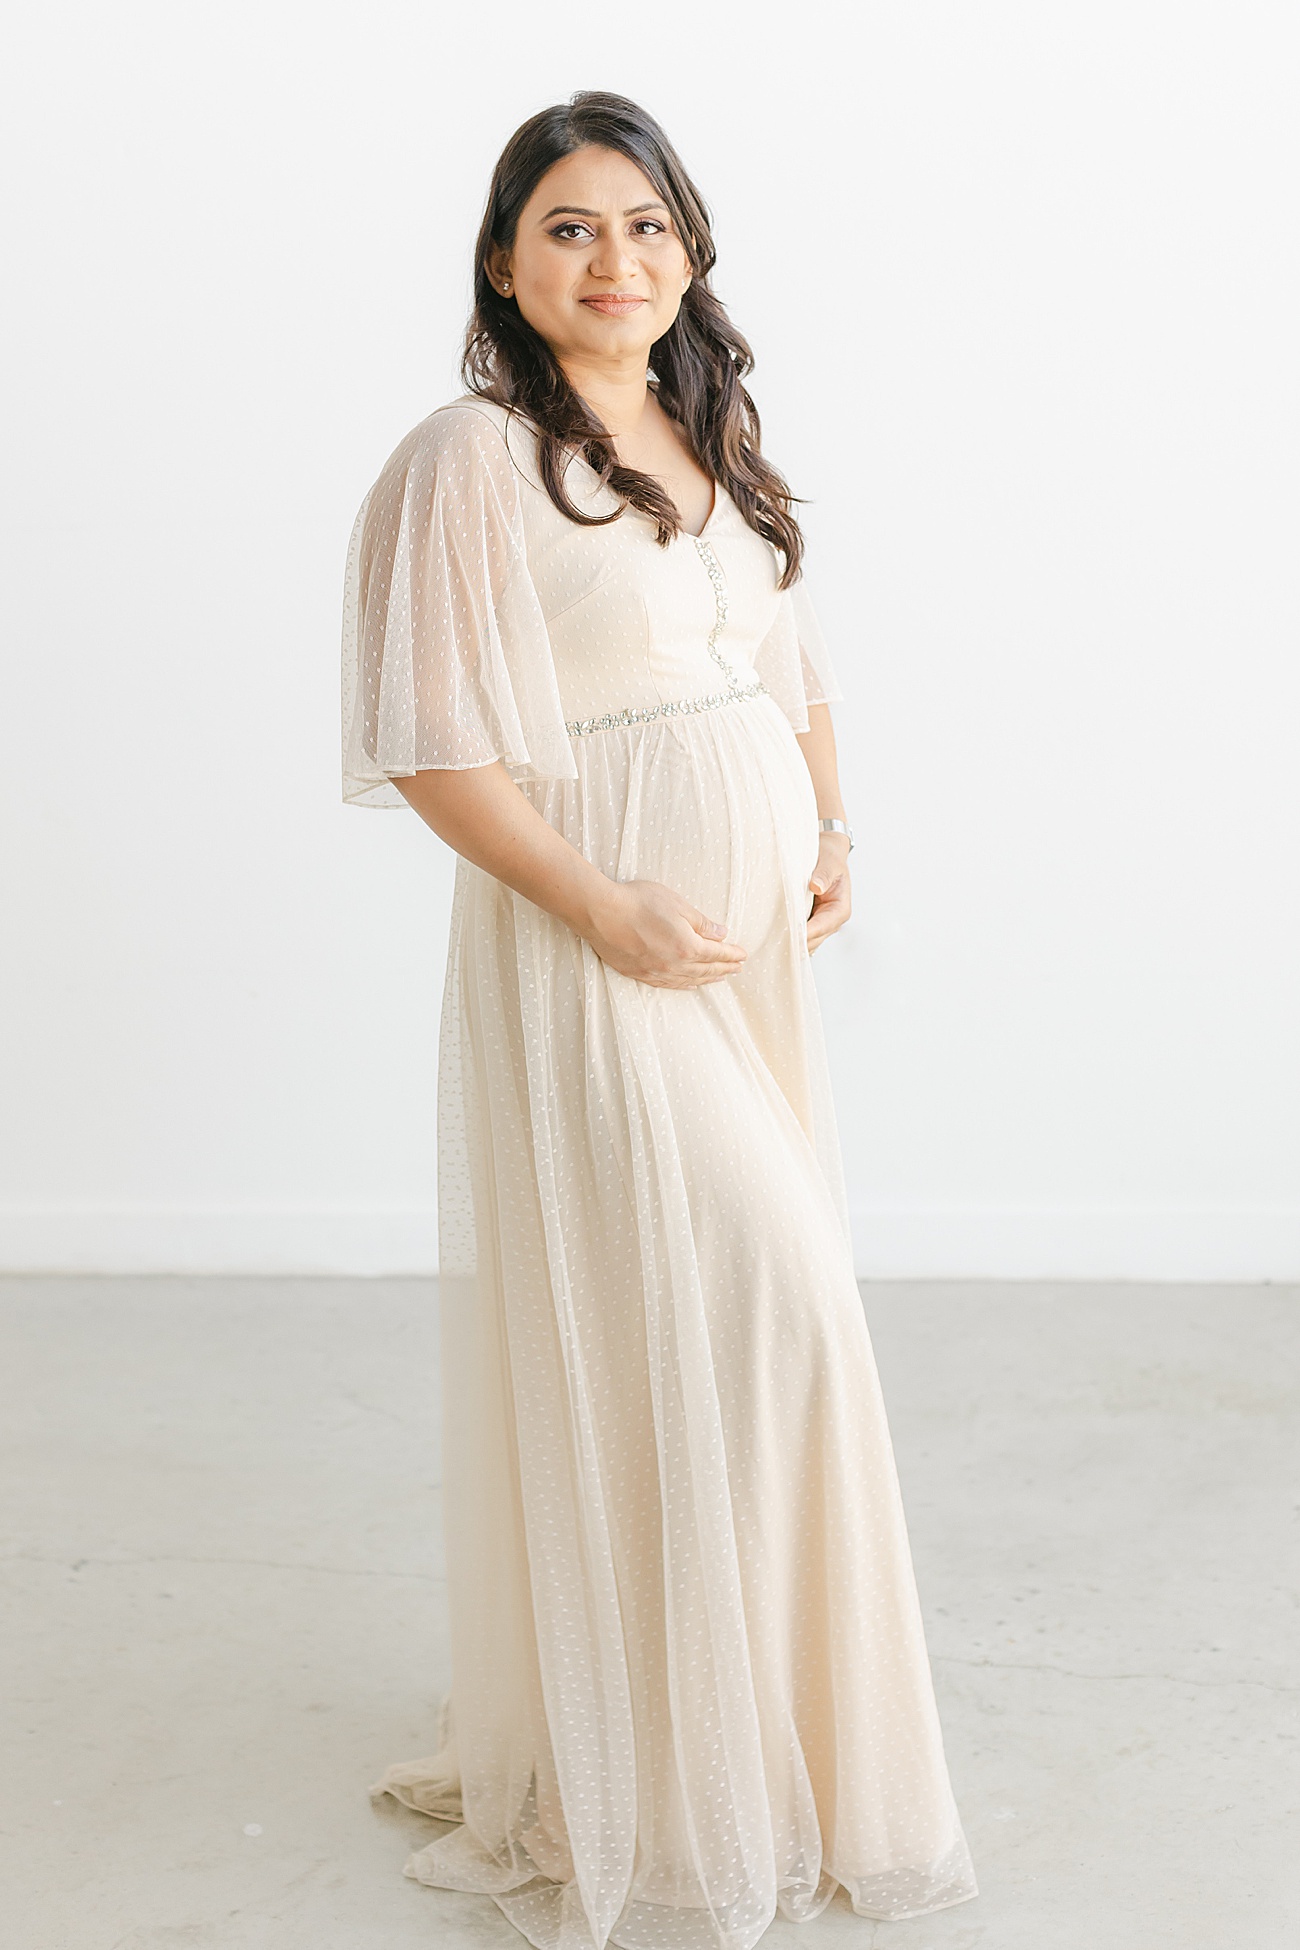 Classic maternity portrait of Mom smiling at camera. Photo by Sana Ahmed Photography.